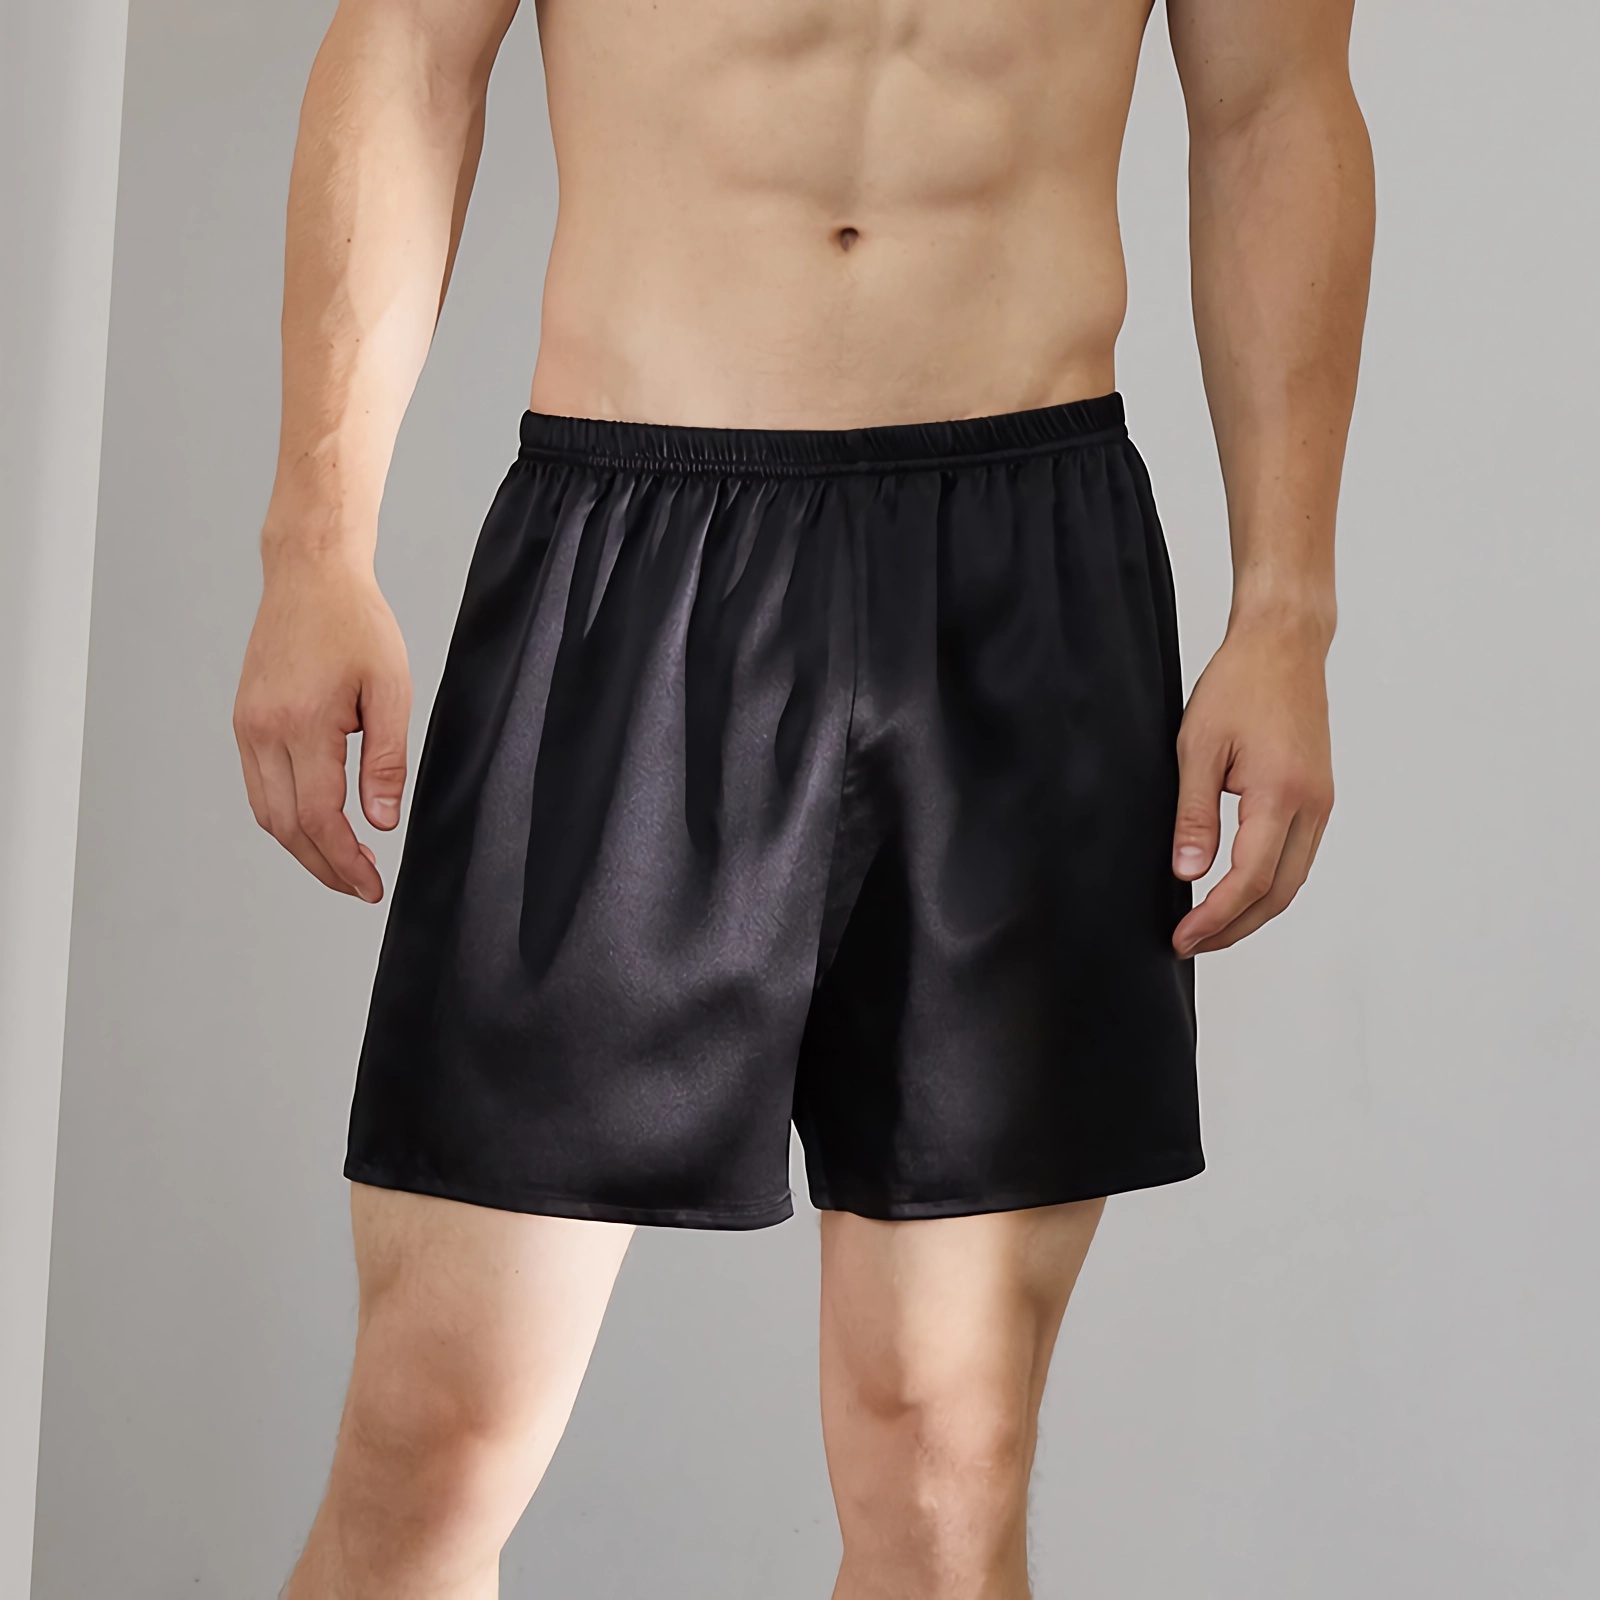 19 Momme Classic Men's Silk Boxers REAL SILK LIFE